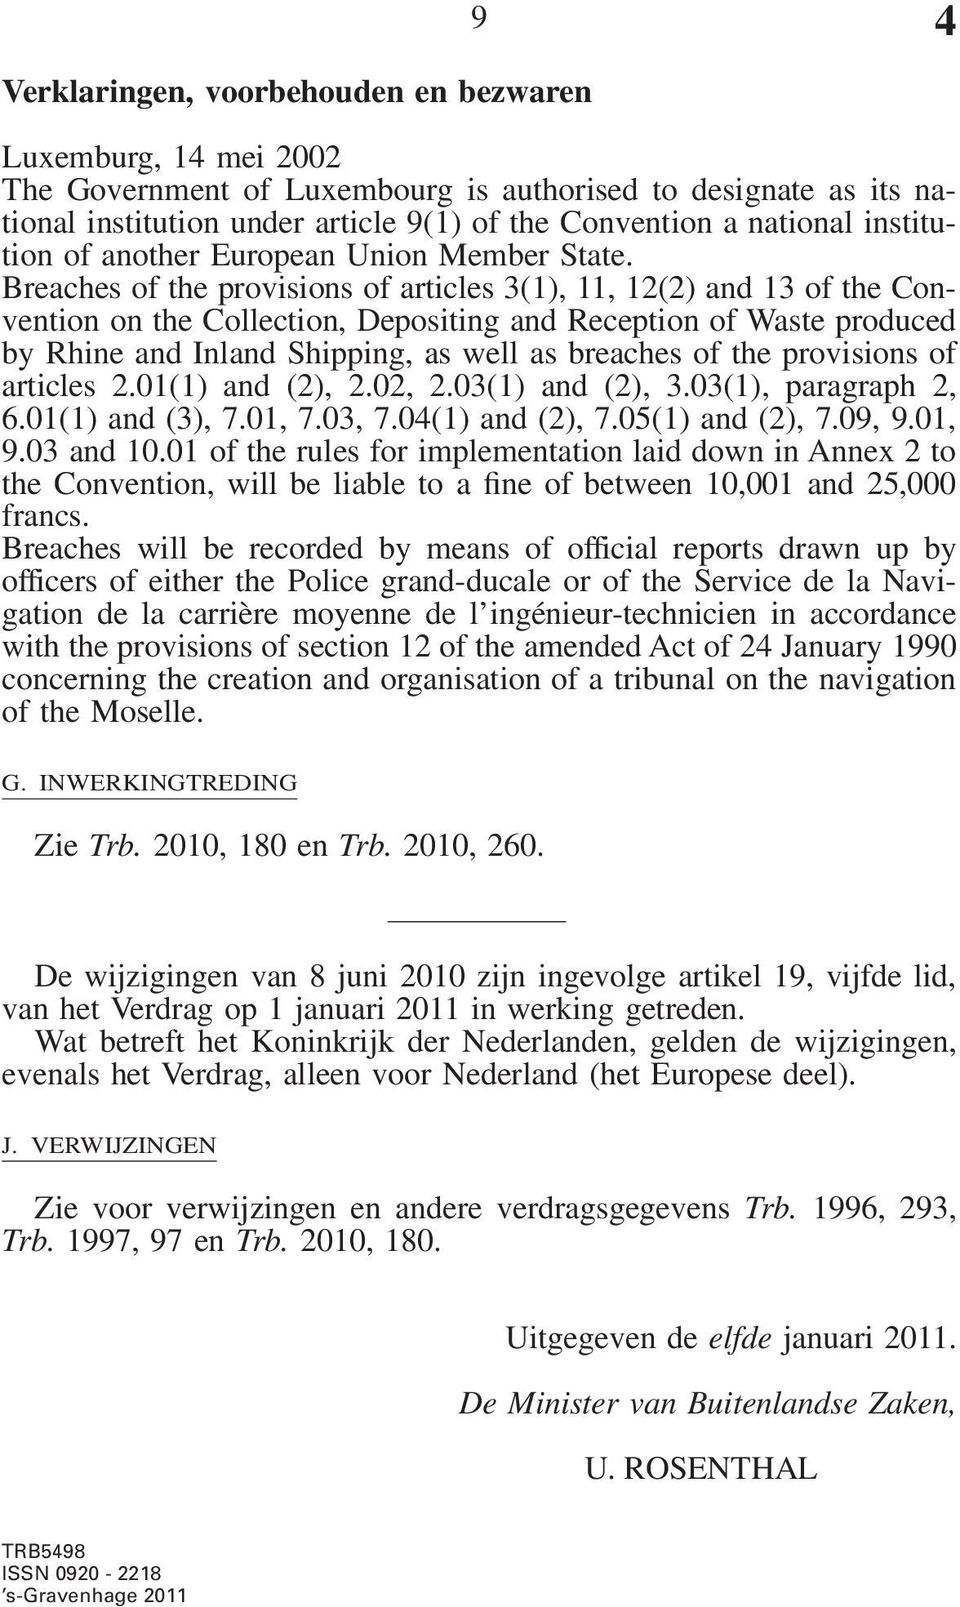 Breaches of the provisions of articles 3(1), 11, 12(2) and 13 of the Convention on the Collection, Depositing and Reception of Waste produced by Rhine and Inland Shipping, as well as breaches of the